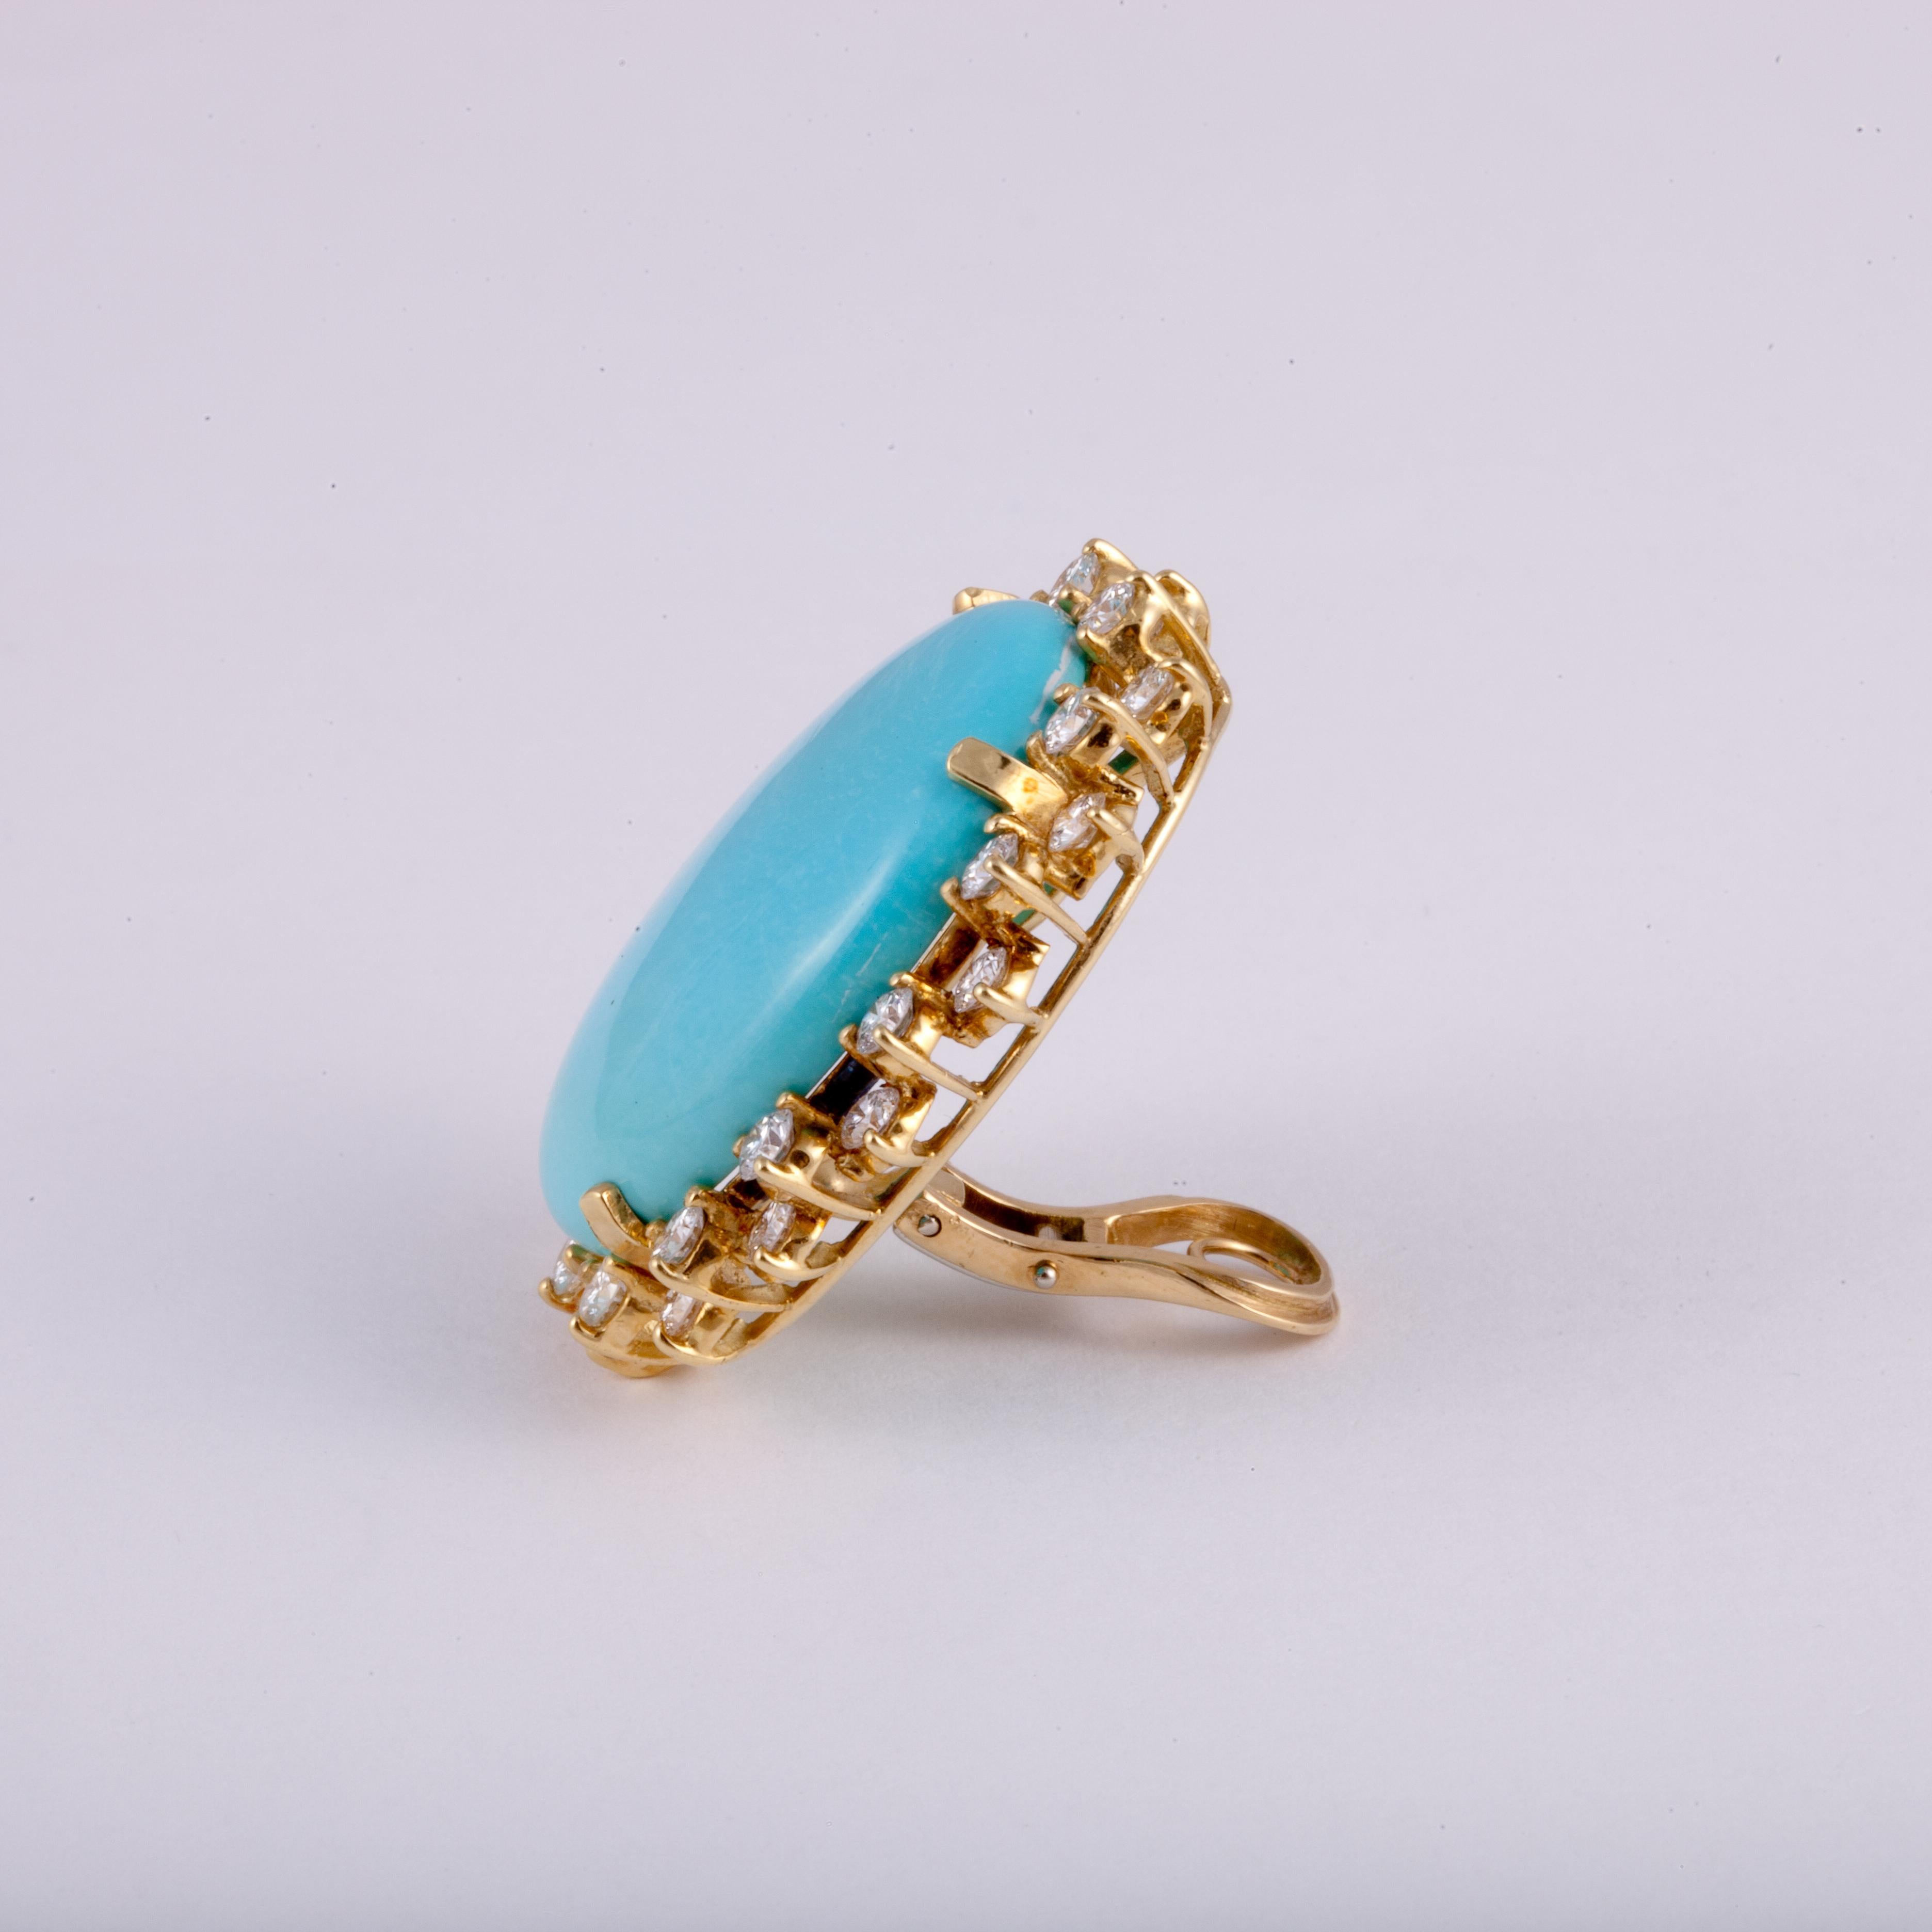 Mixed Cut 18K Gold Turquoise and Diamond Earrings